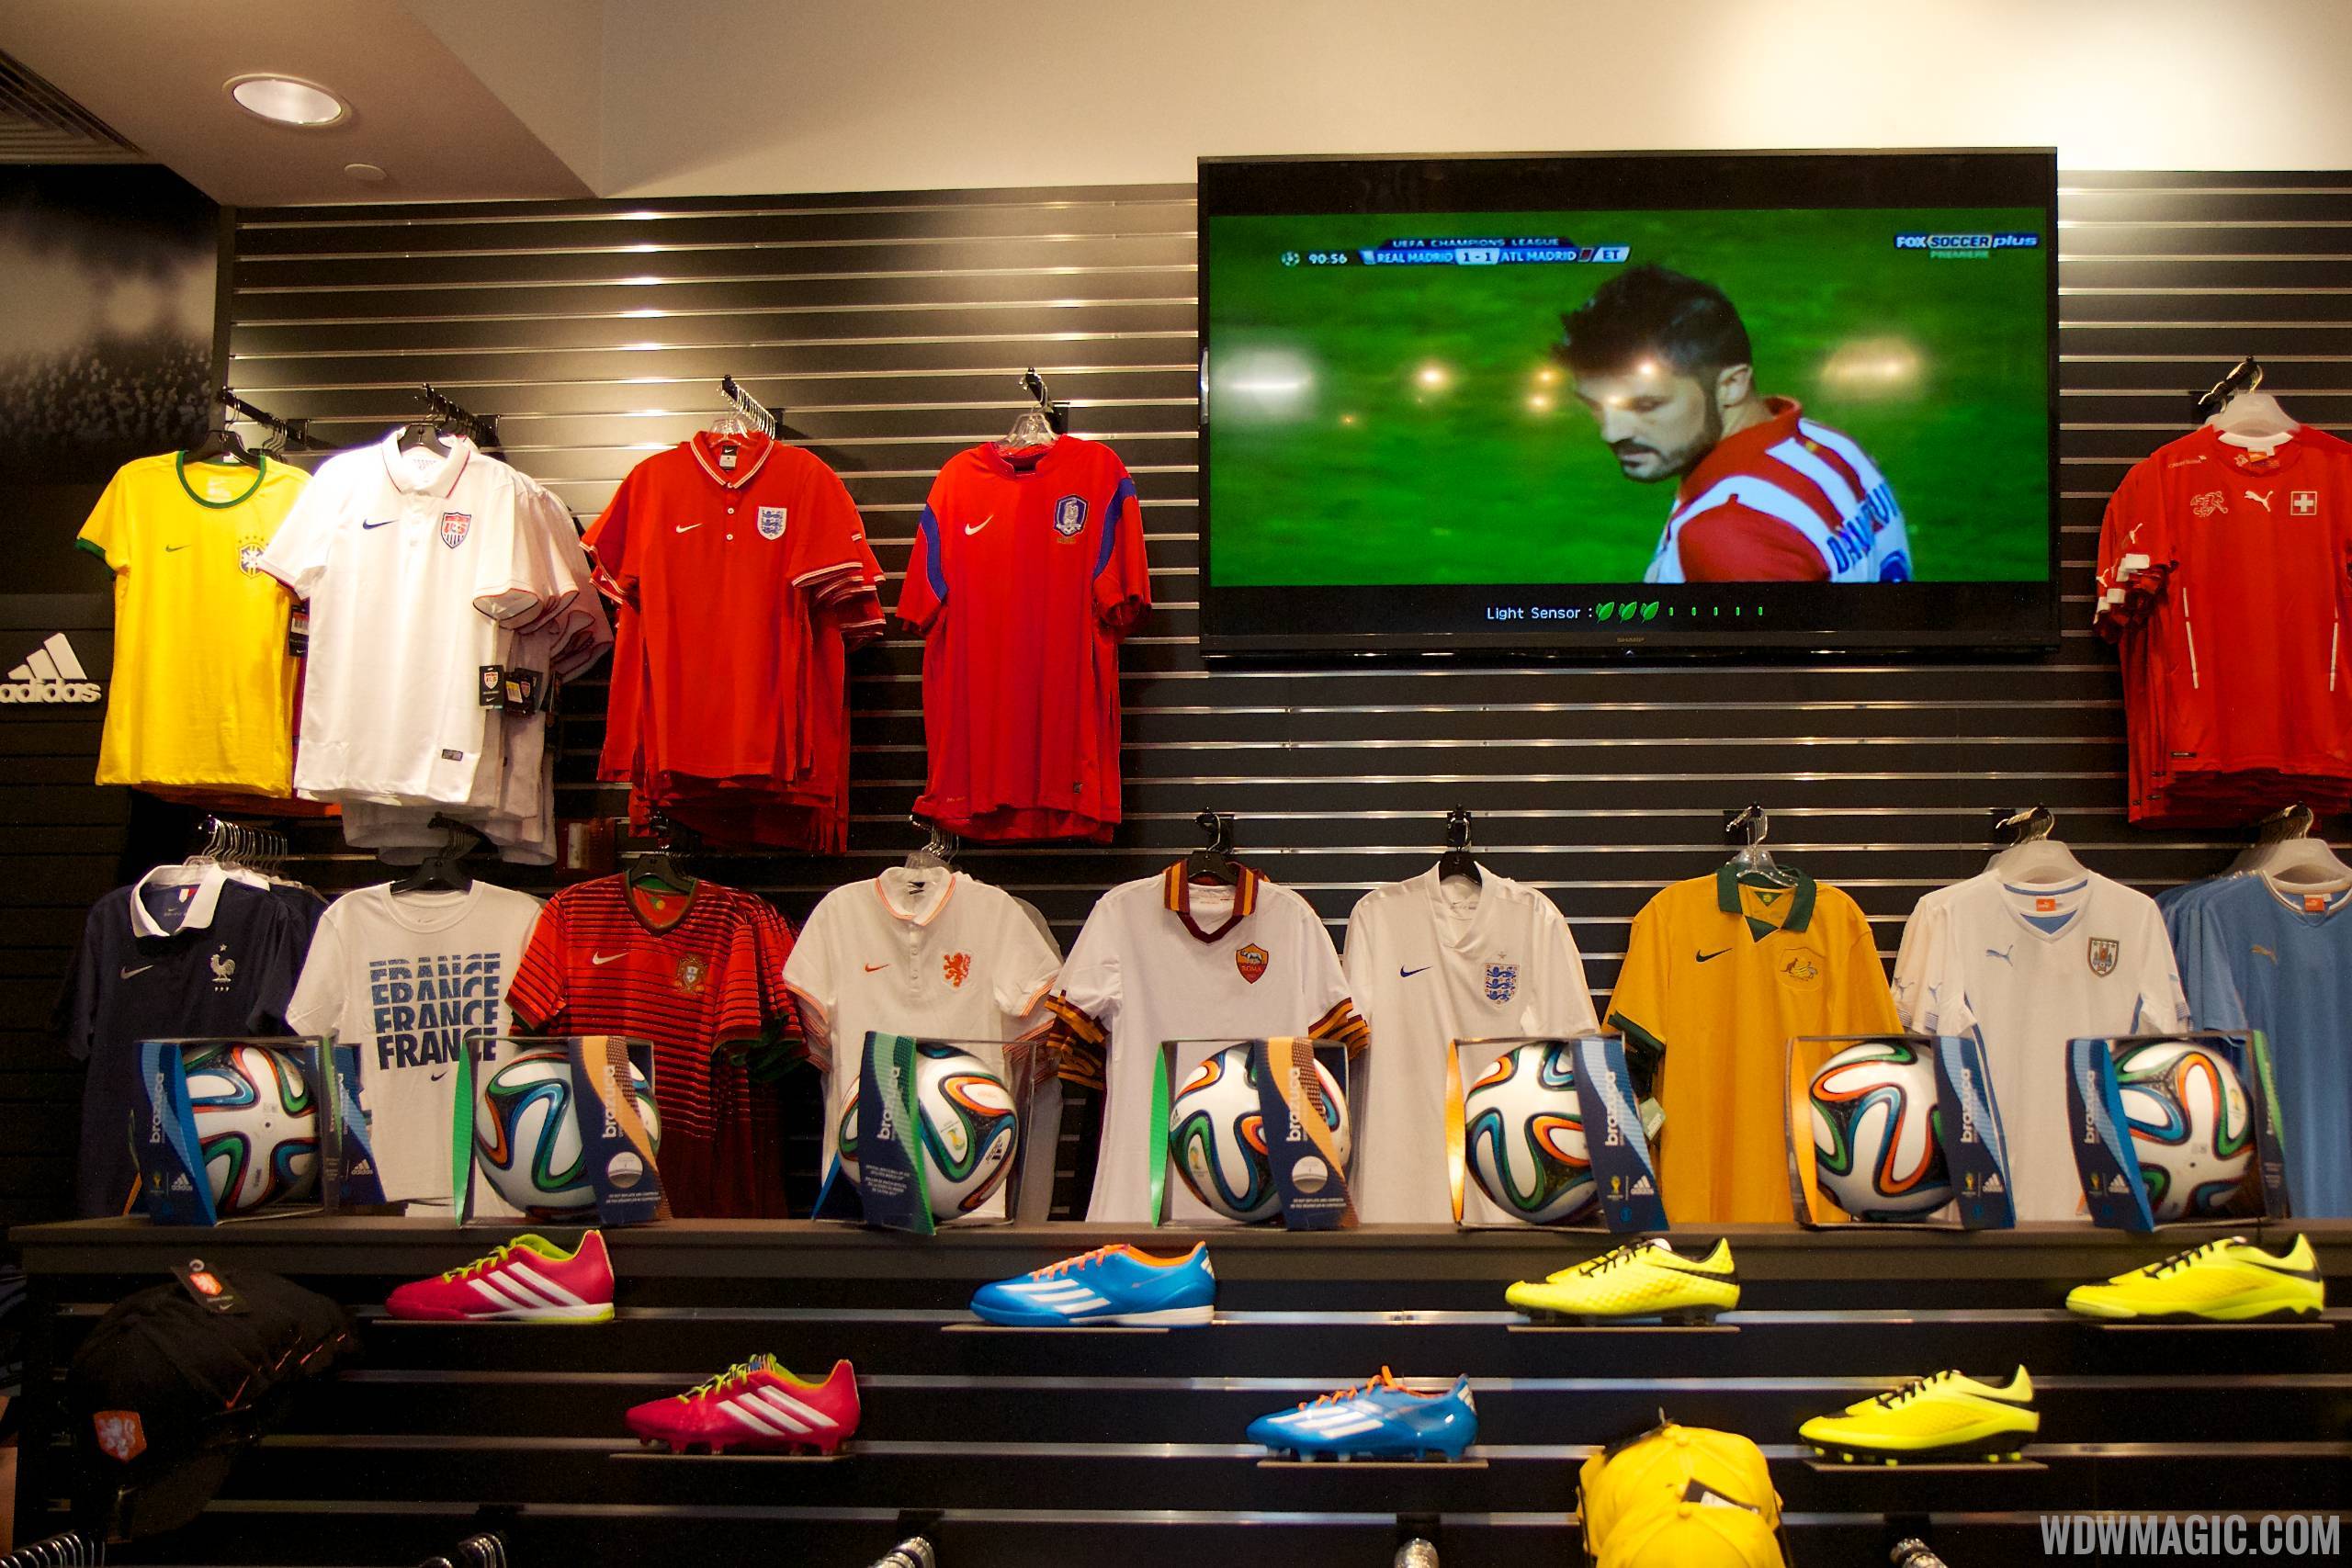 PHOTOS - United World Soccer now open at Downtown Disney West Side